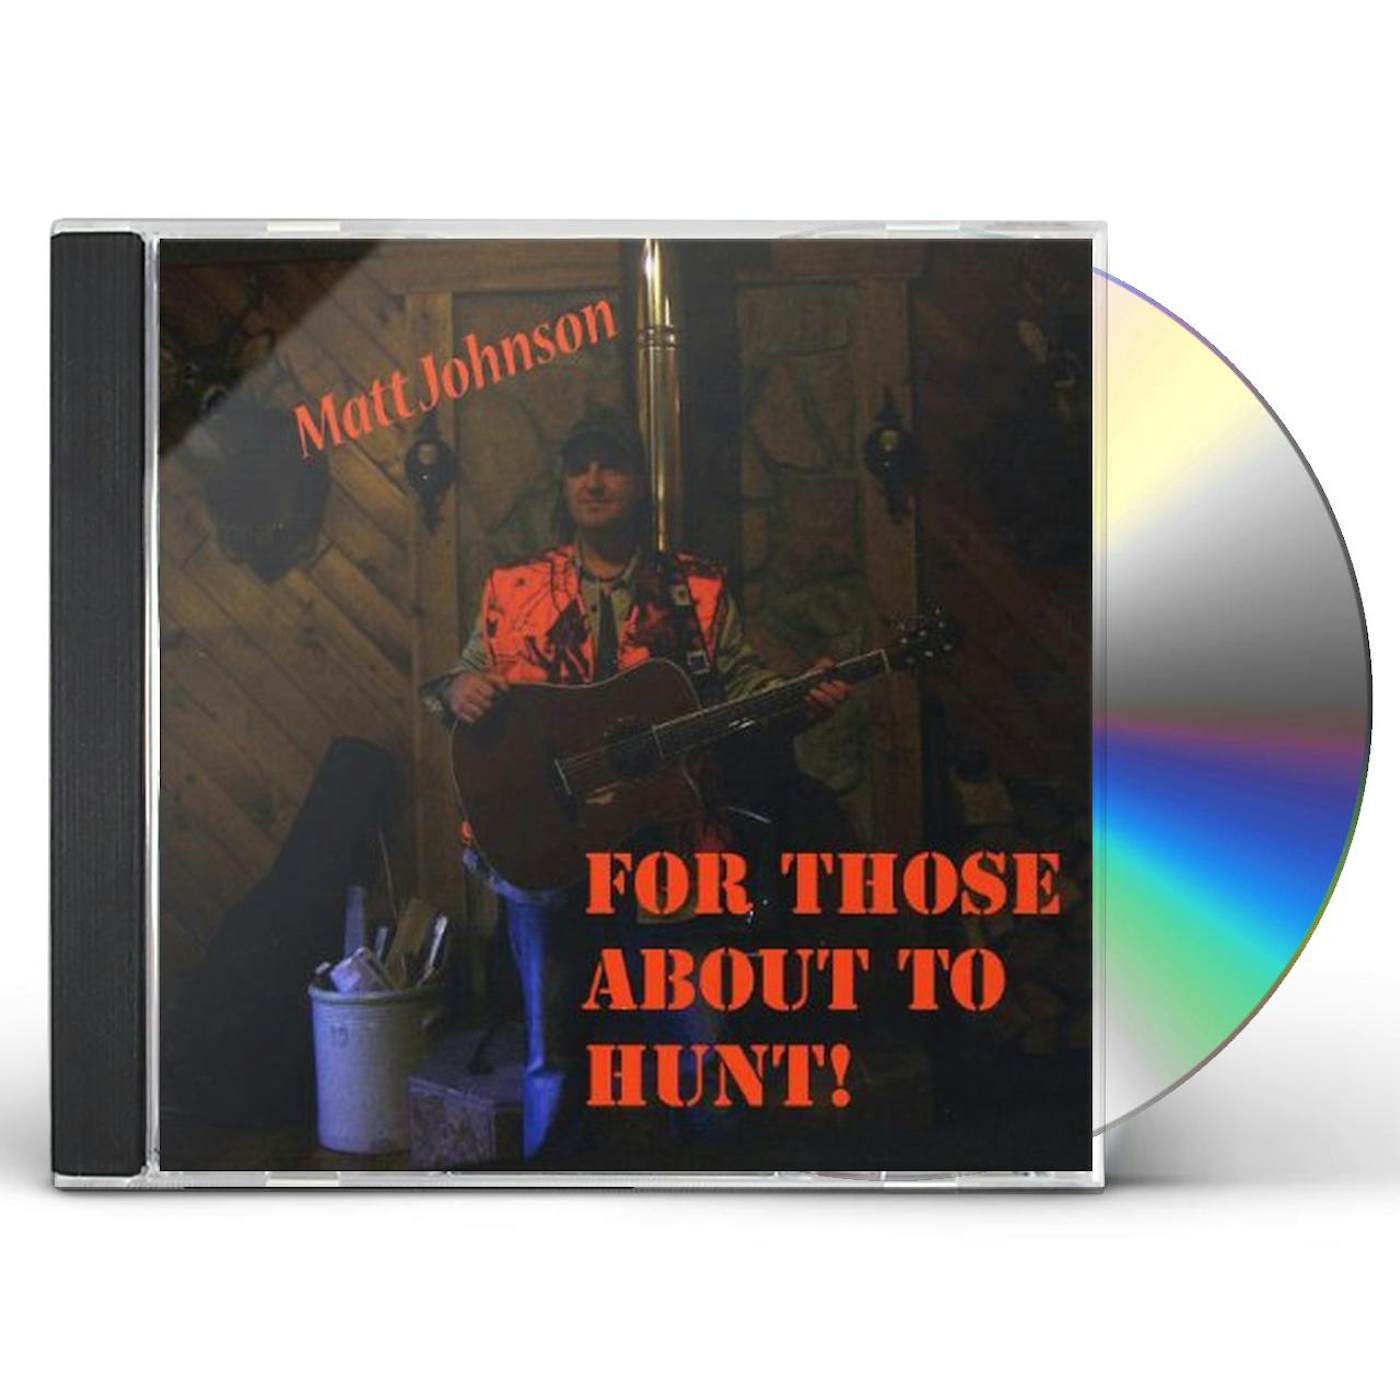 Matt Johnson FOR THOSE ABOUT THE HUNT! CD